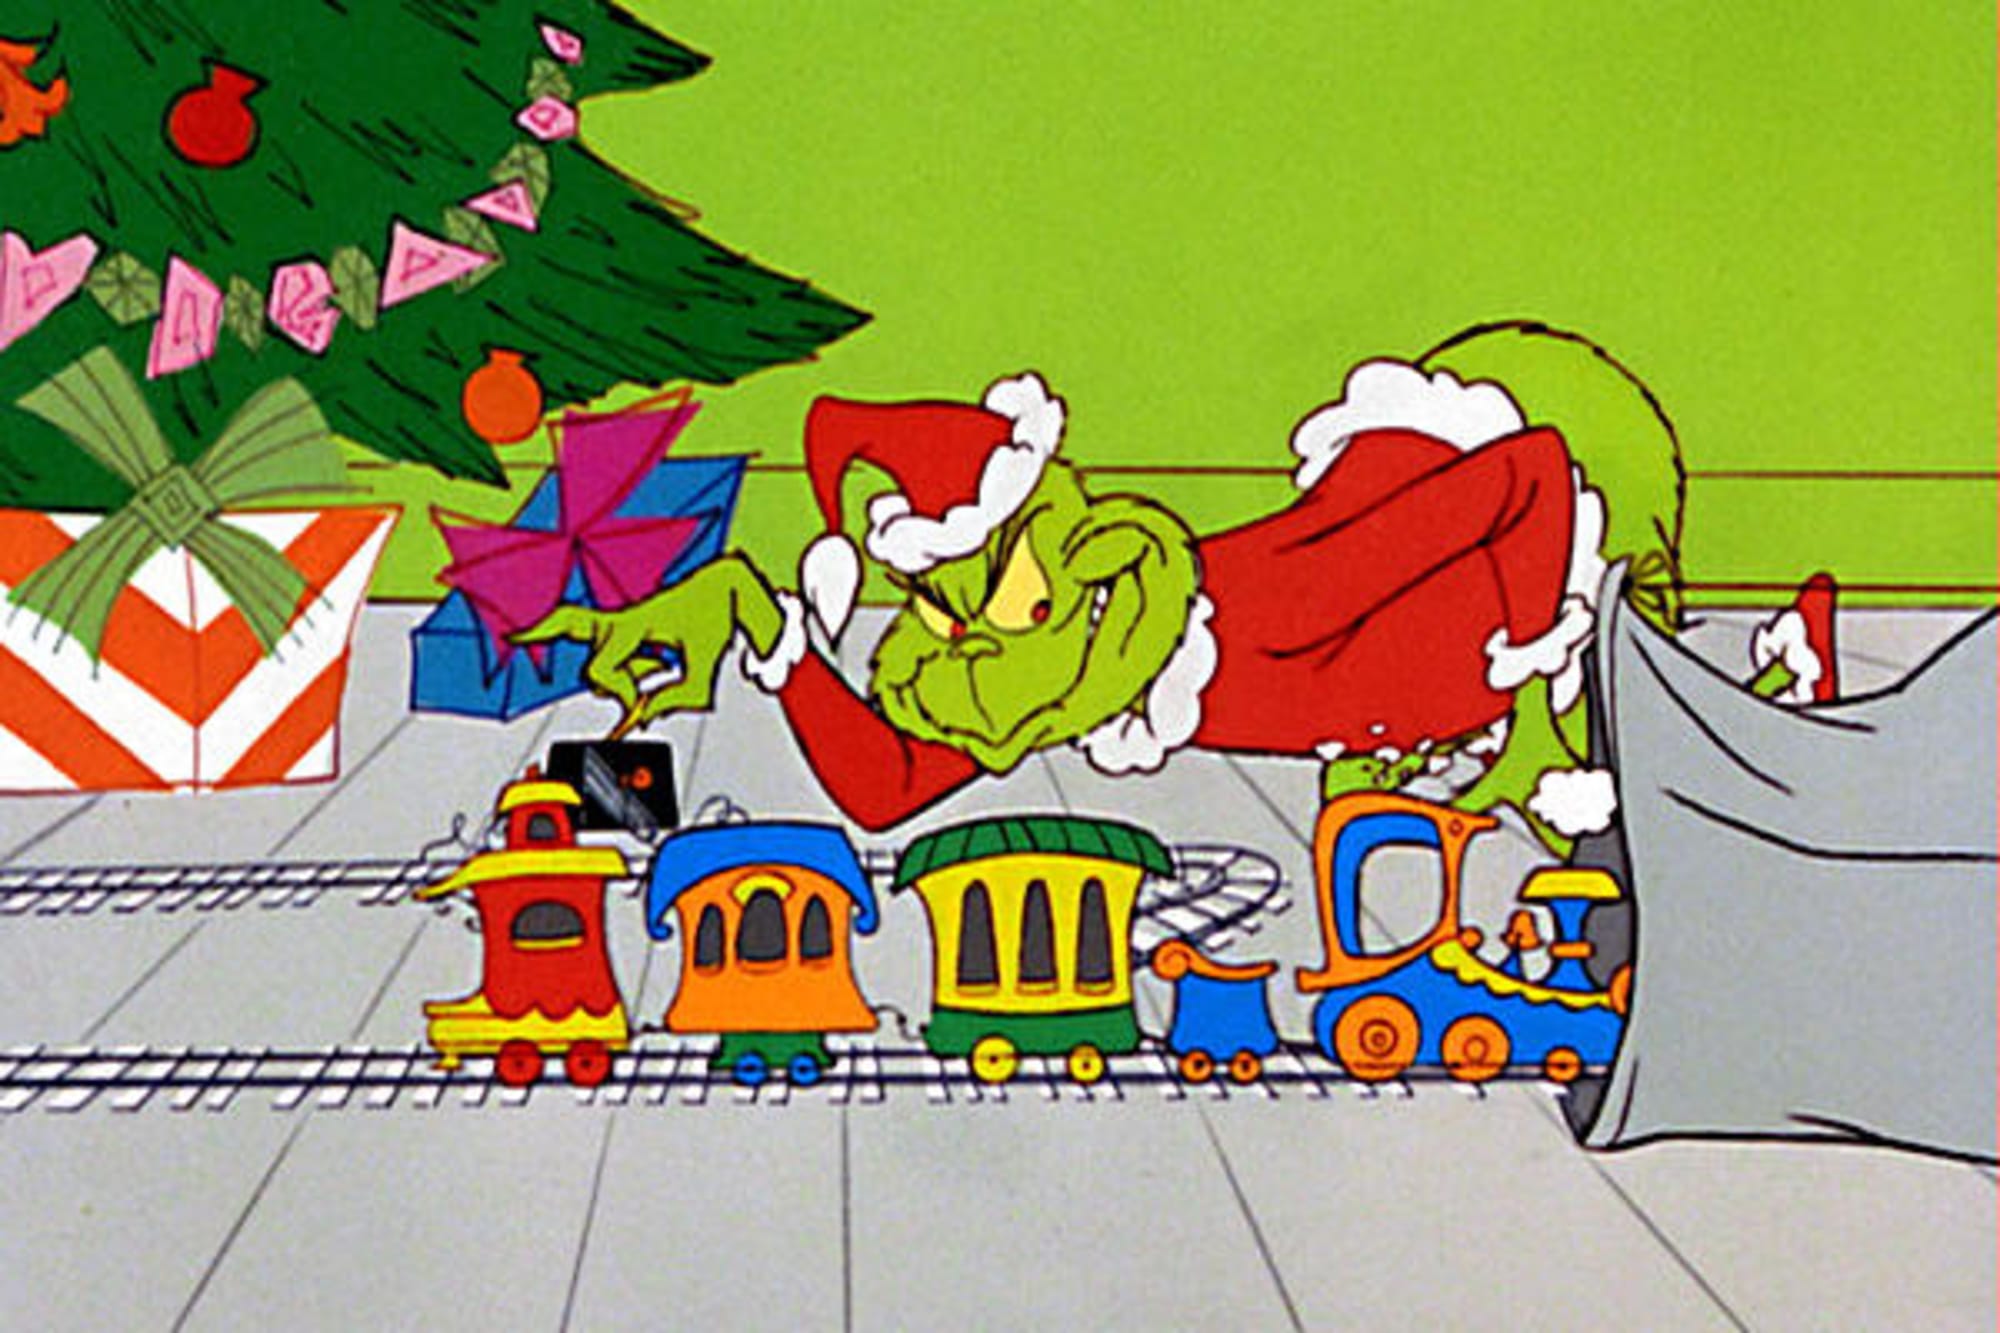 2. "The Grinch Who Stole Gifts" - wide 9